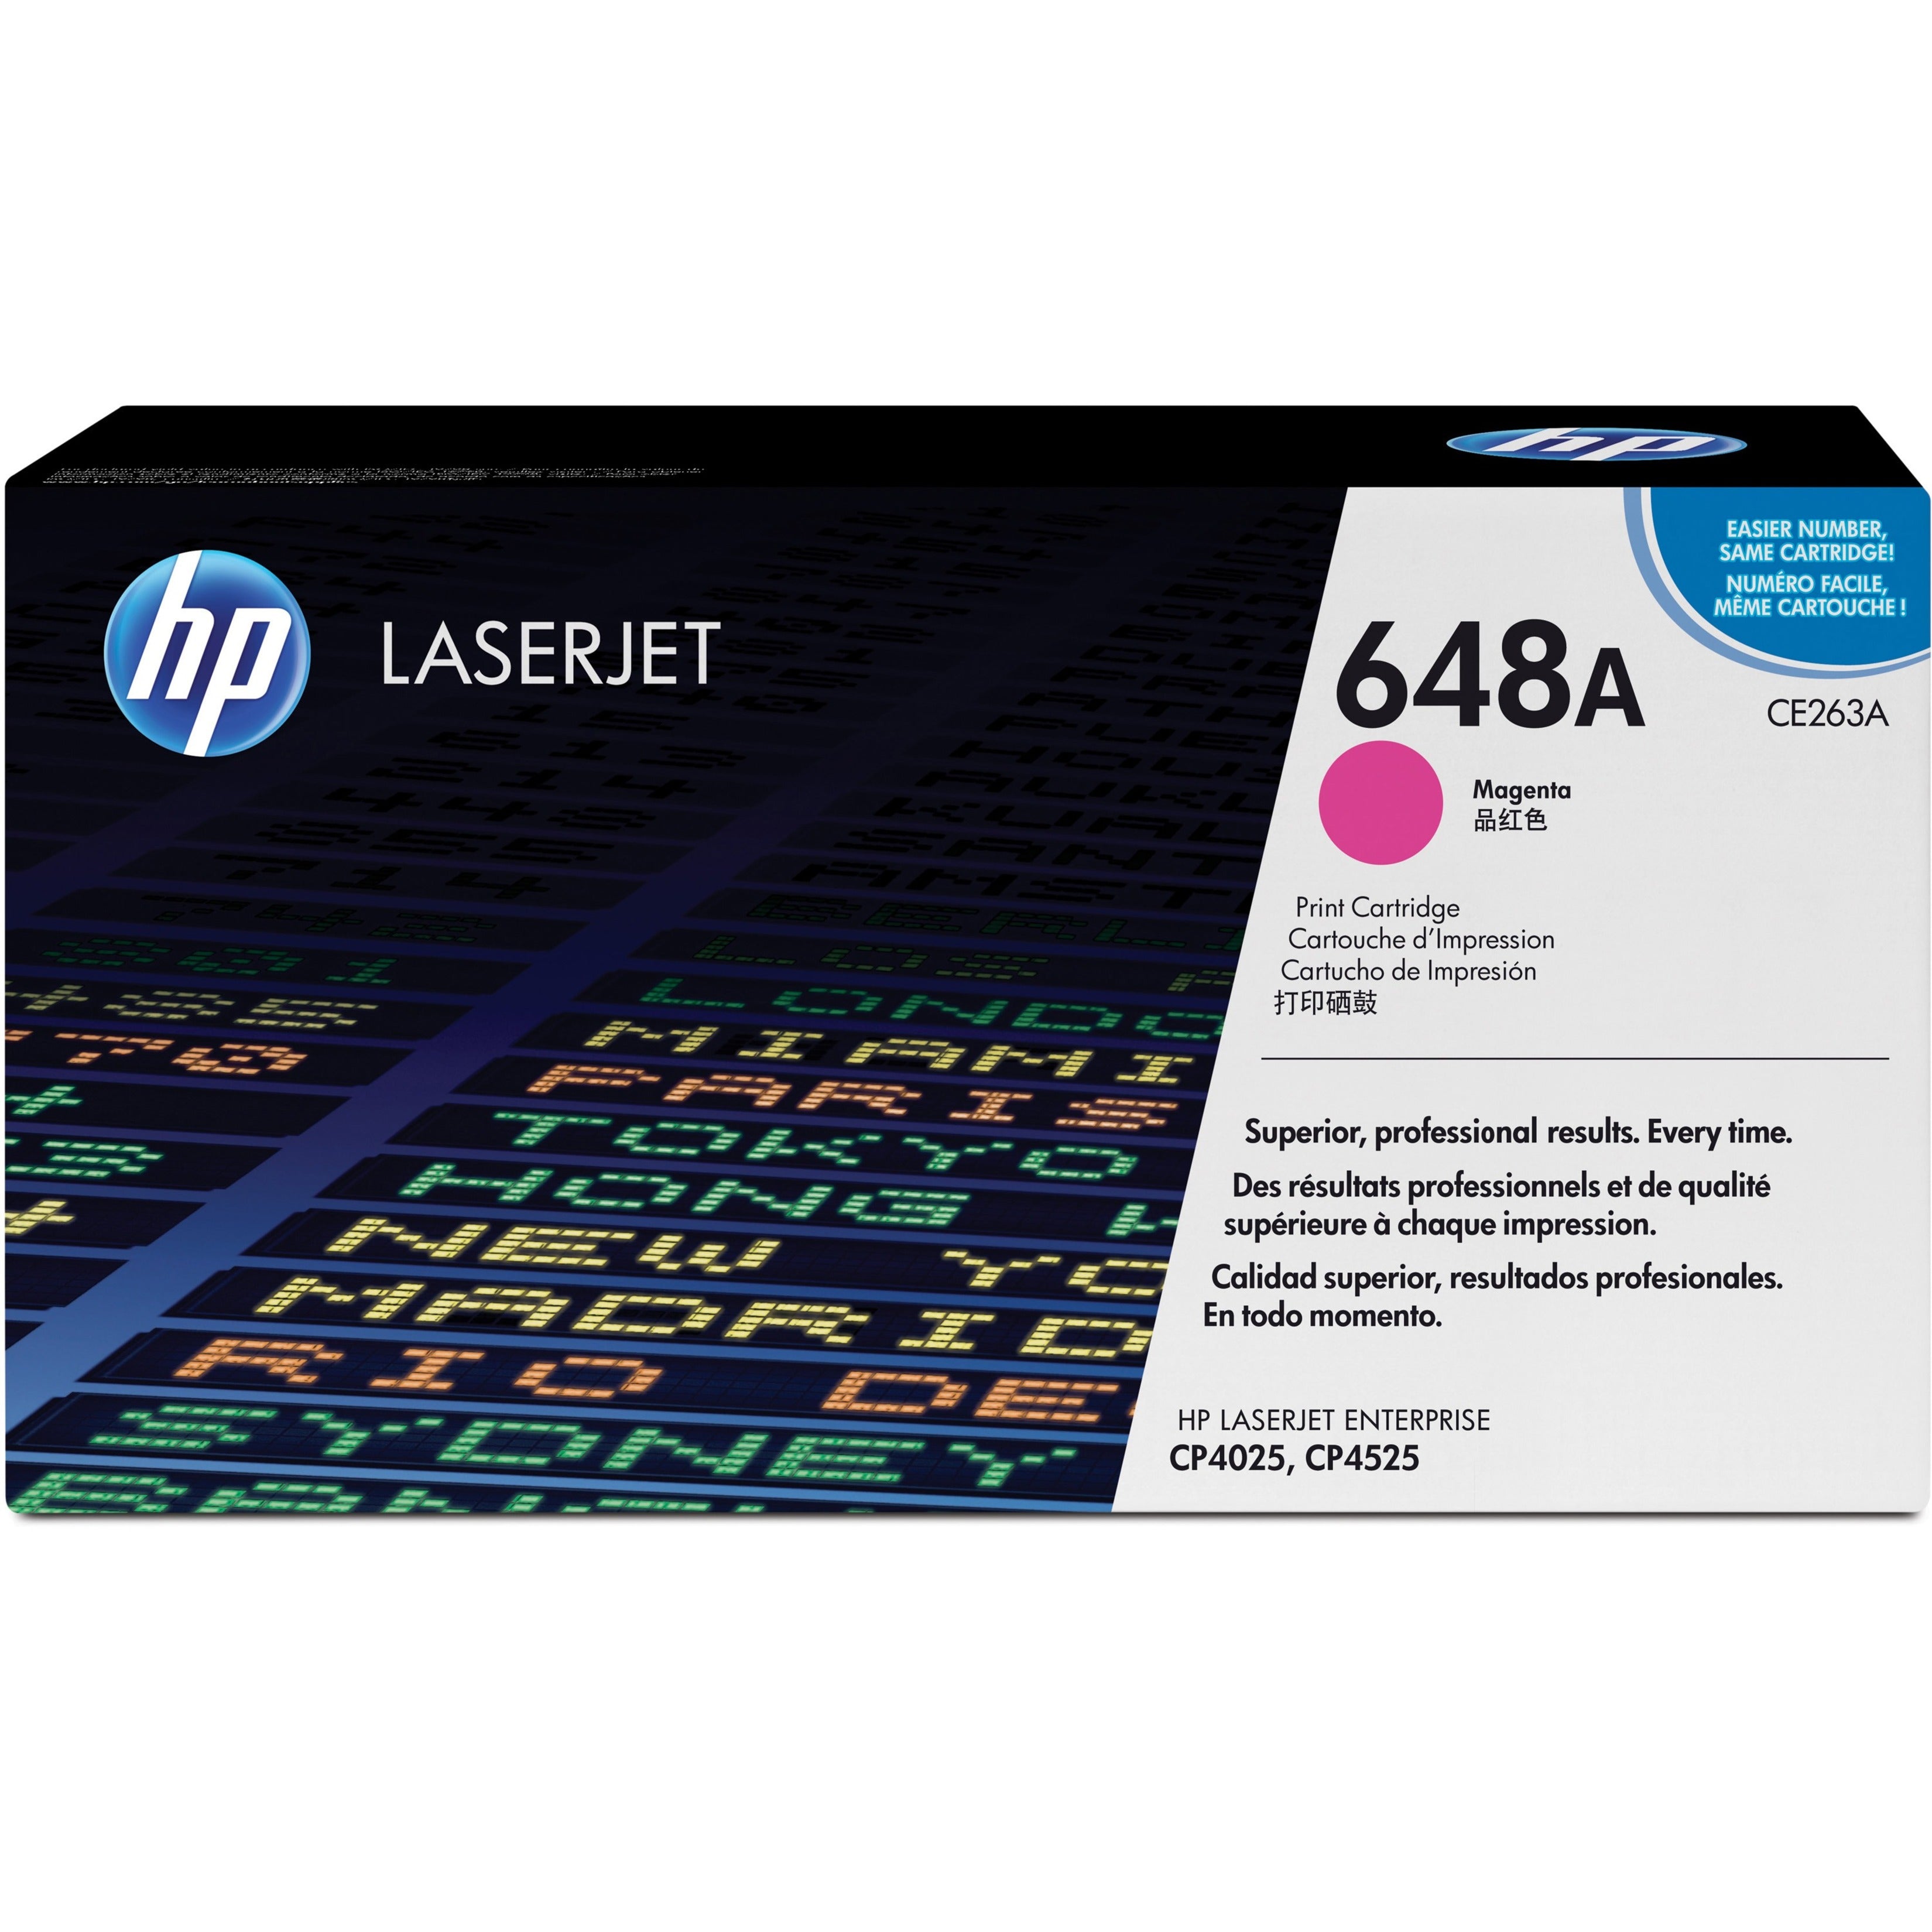 HP CE263A 648A Magenta Toner Cartridge, 11000 Page Yield